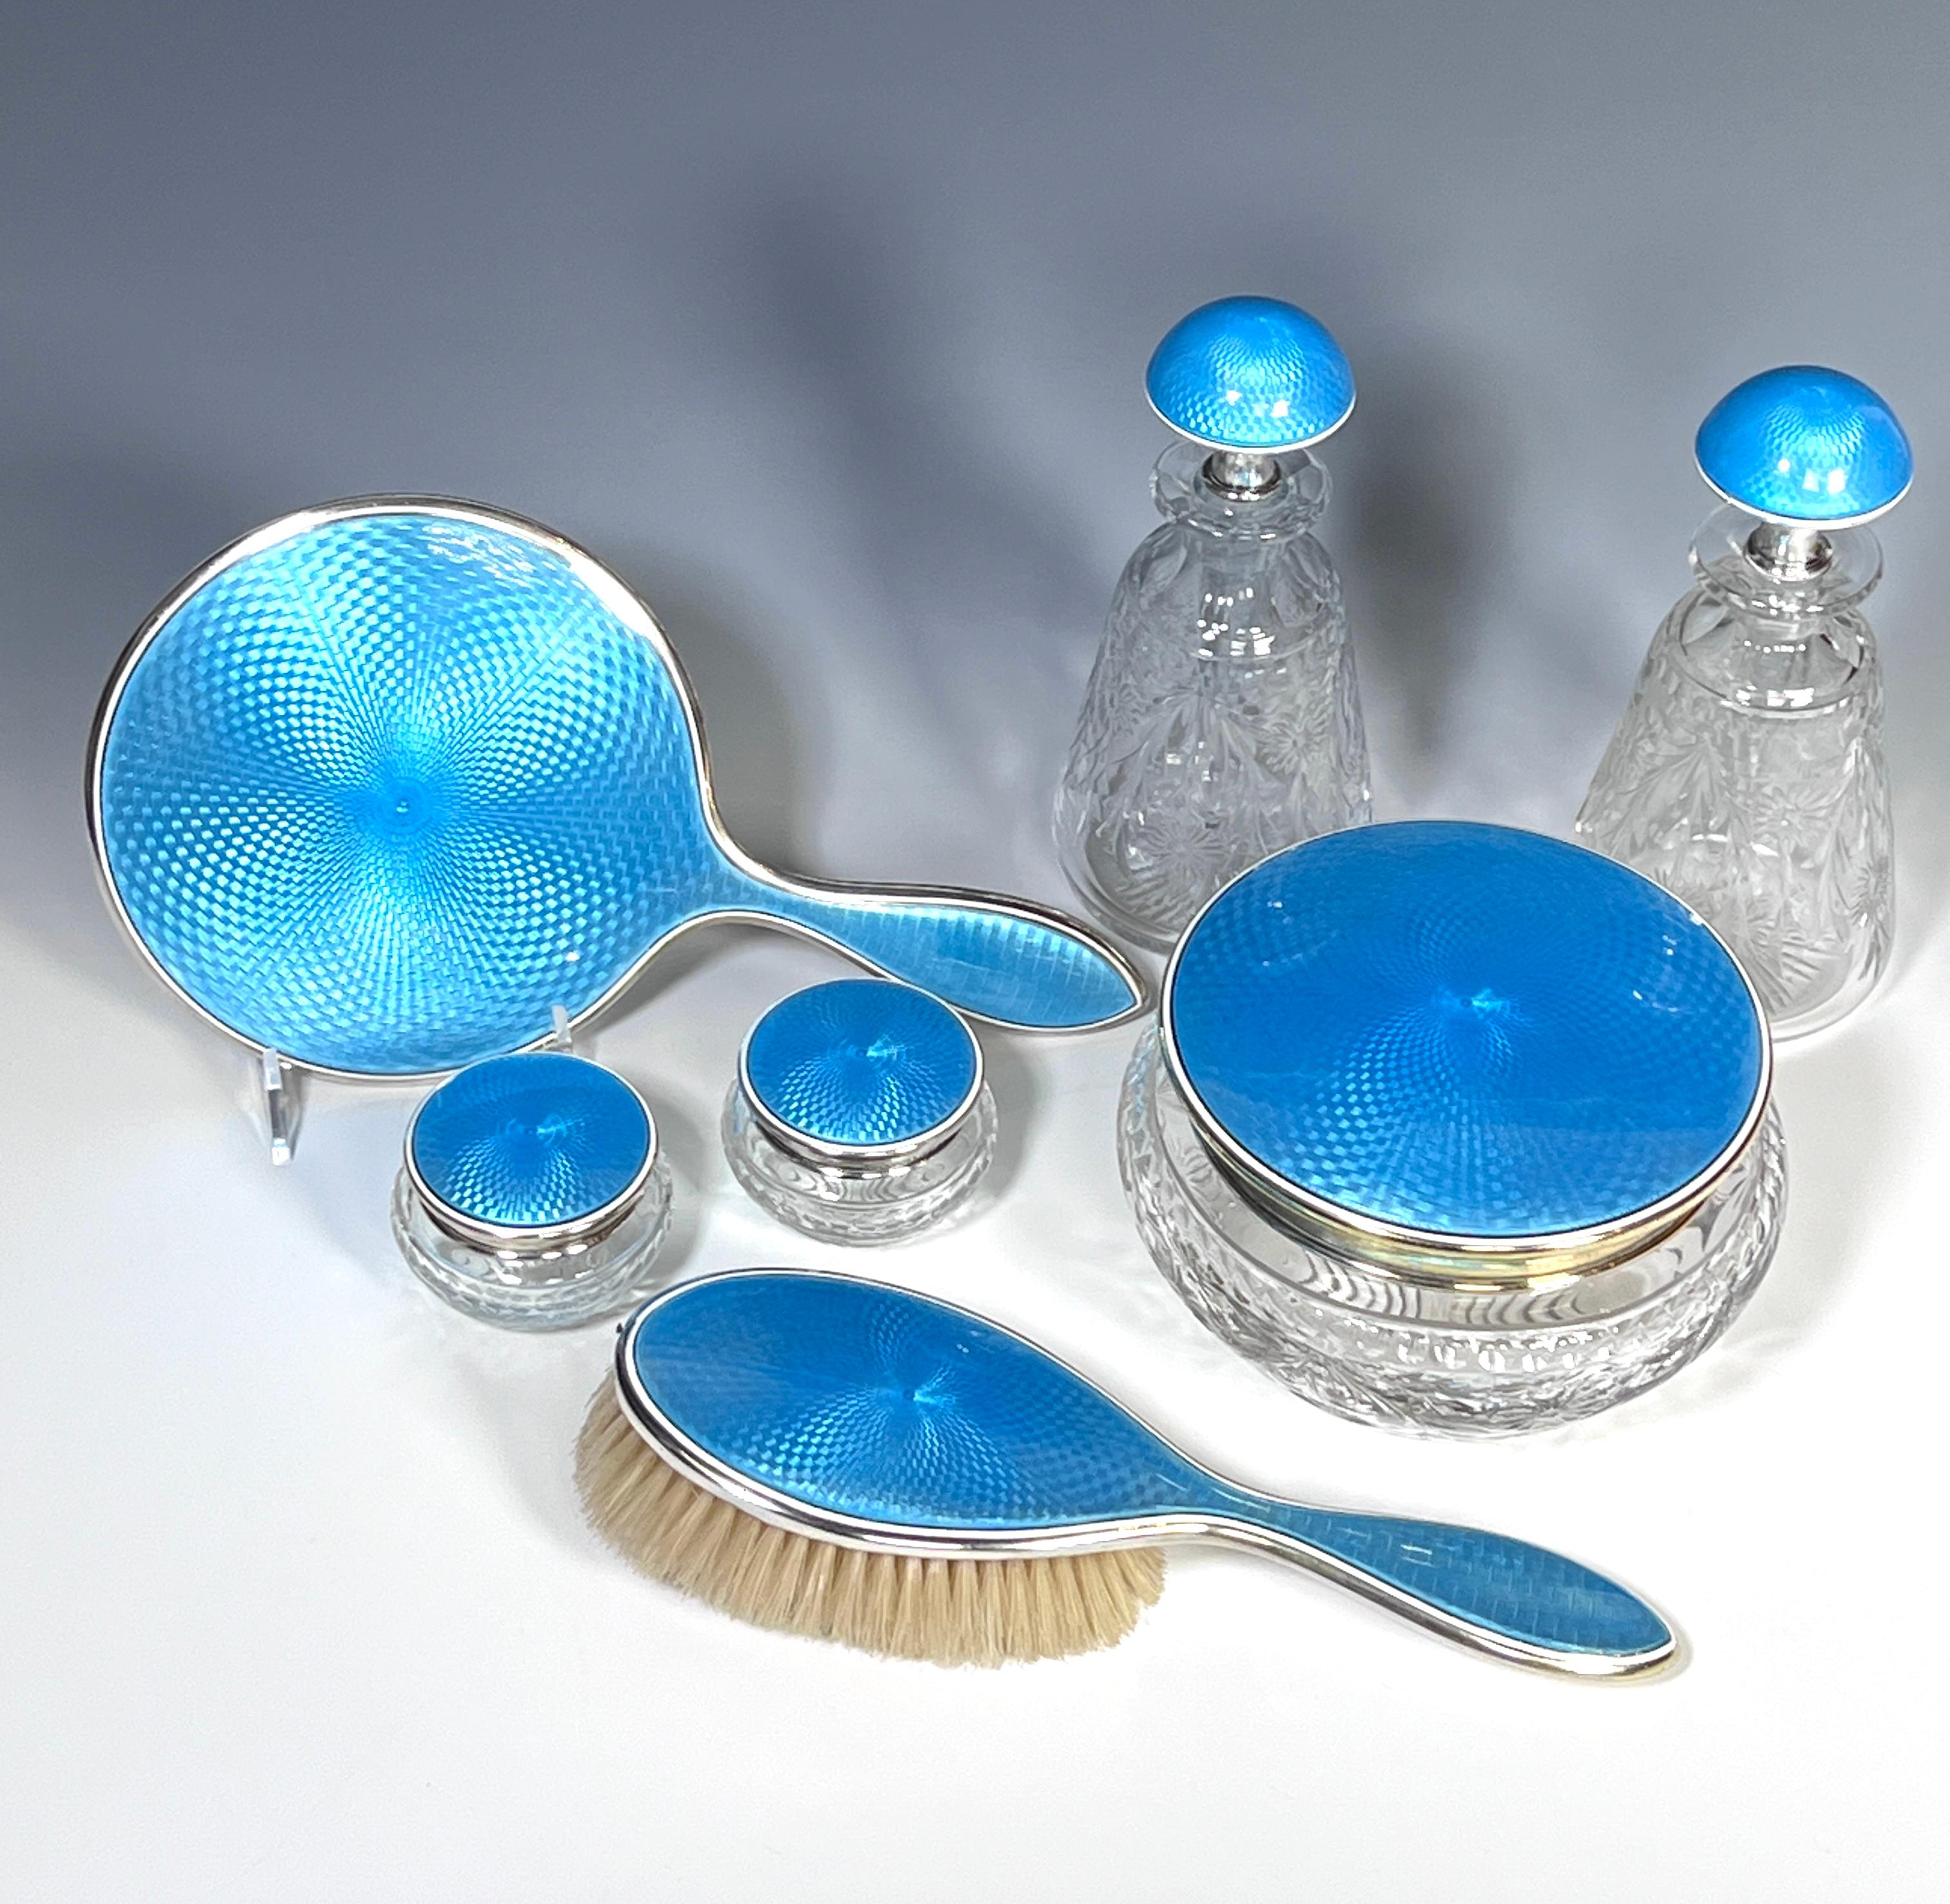 This dresser set is made by two masterful companies to create an exquisite 7 piece set featuring vibrant turquoise enamels with hand blown crystal perfumes, (6.88